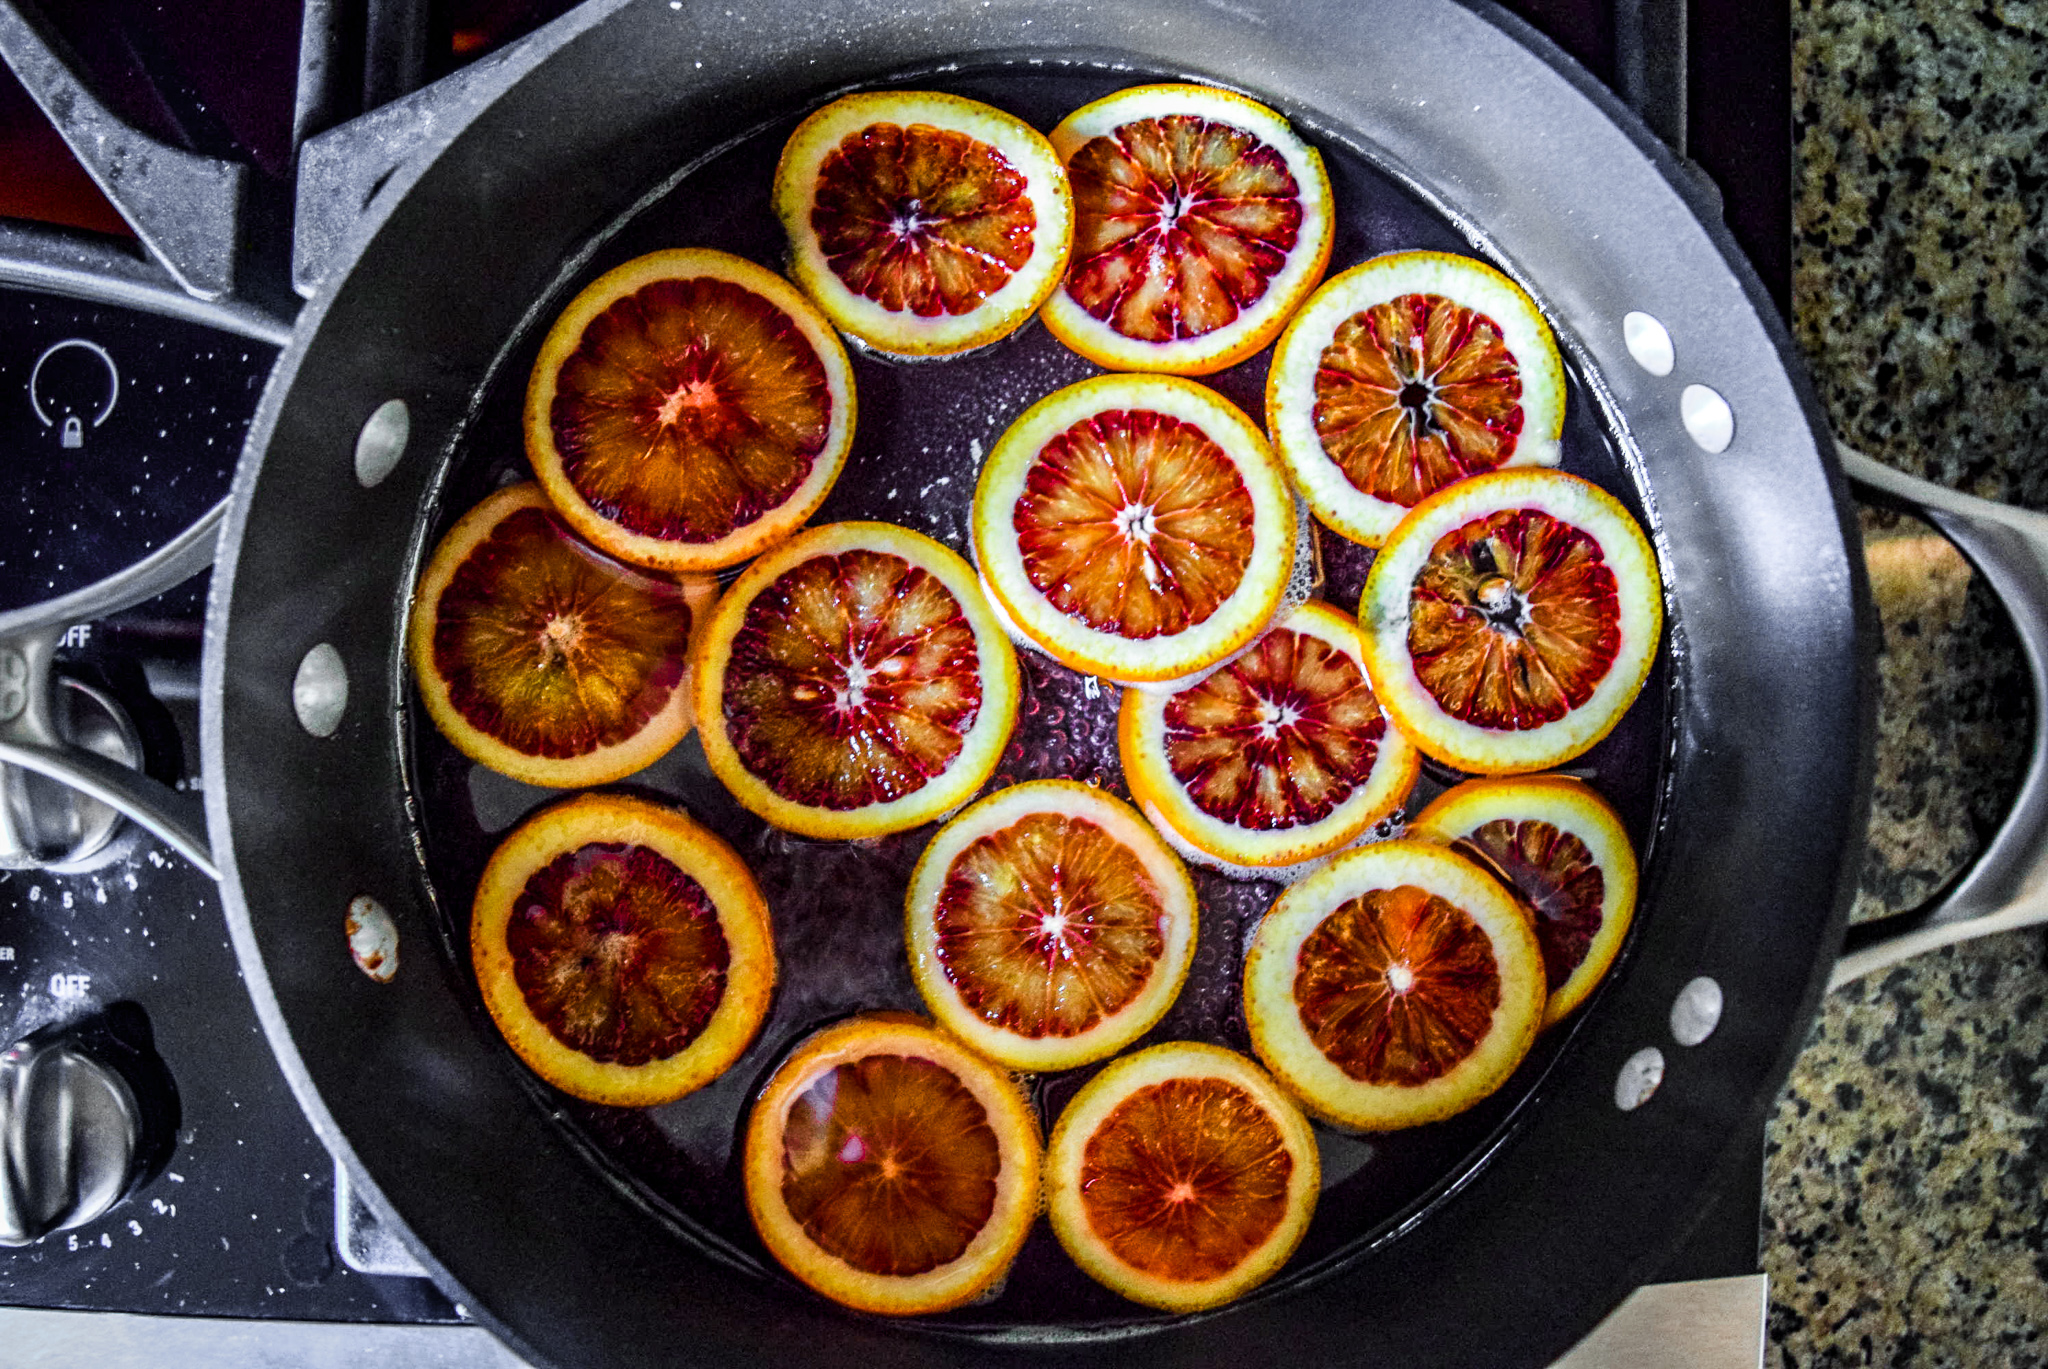 Blood orange slices in sugar water for candying from top